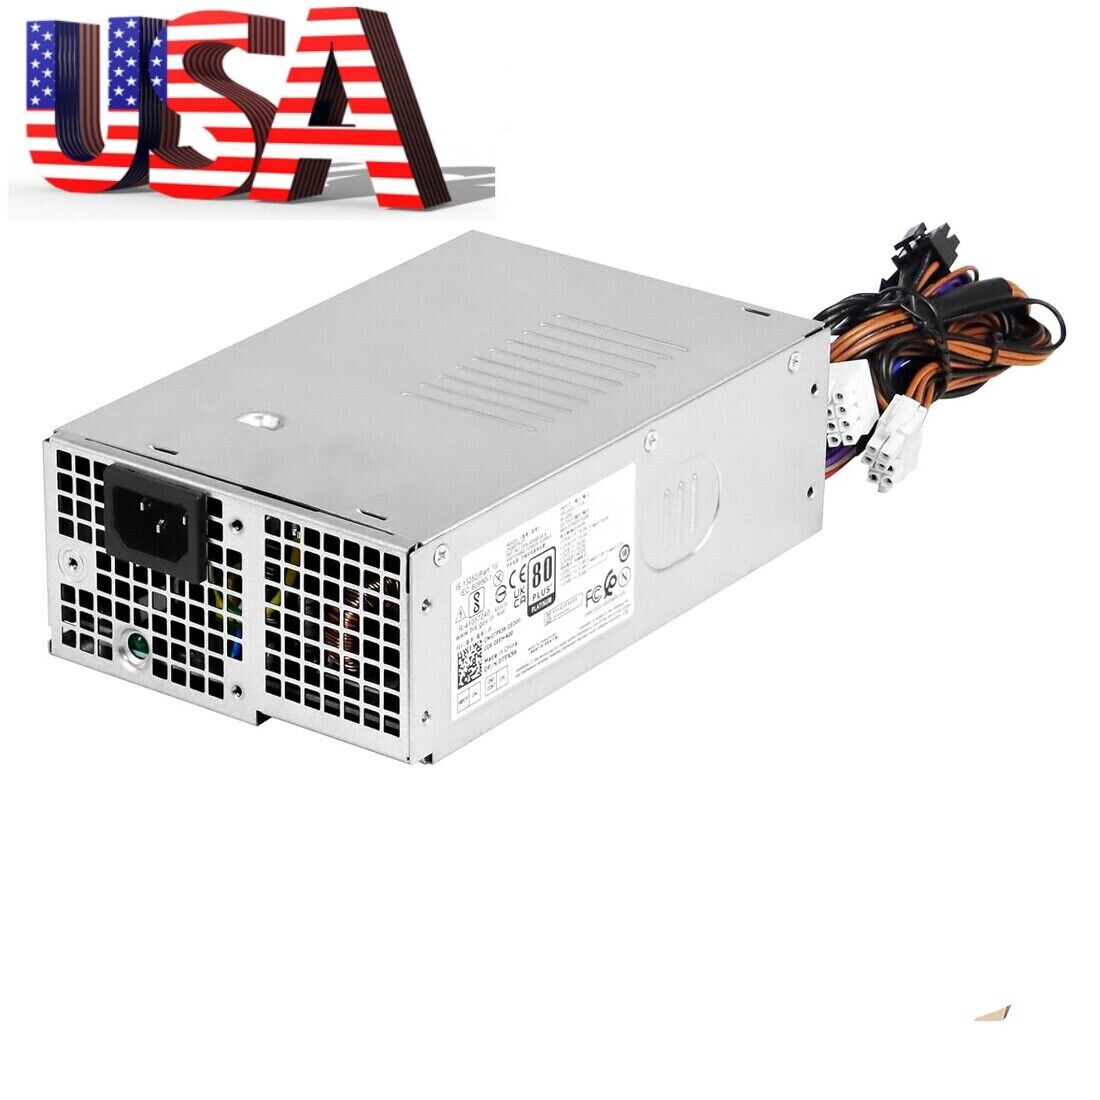 New 500W Power Supply D500EPS-01 For DELL Precision T3660 DYW3N TPX56 RJVH9 US